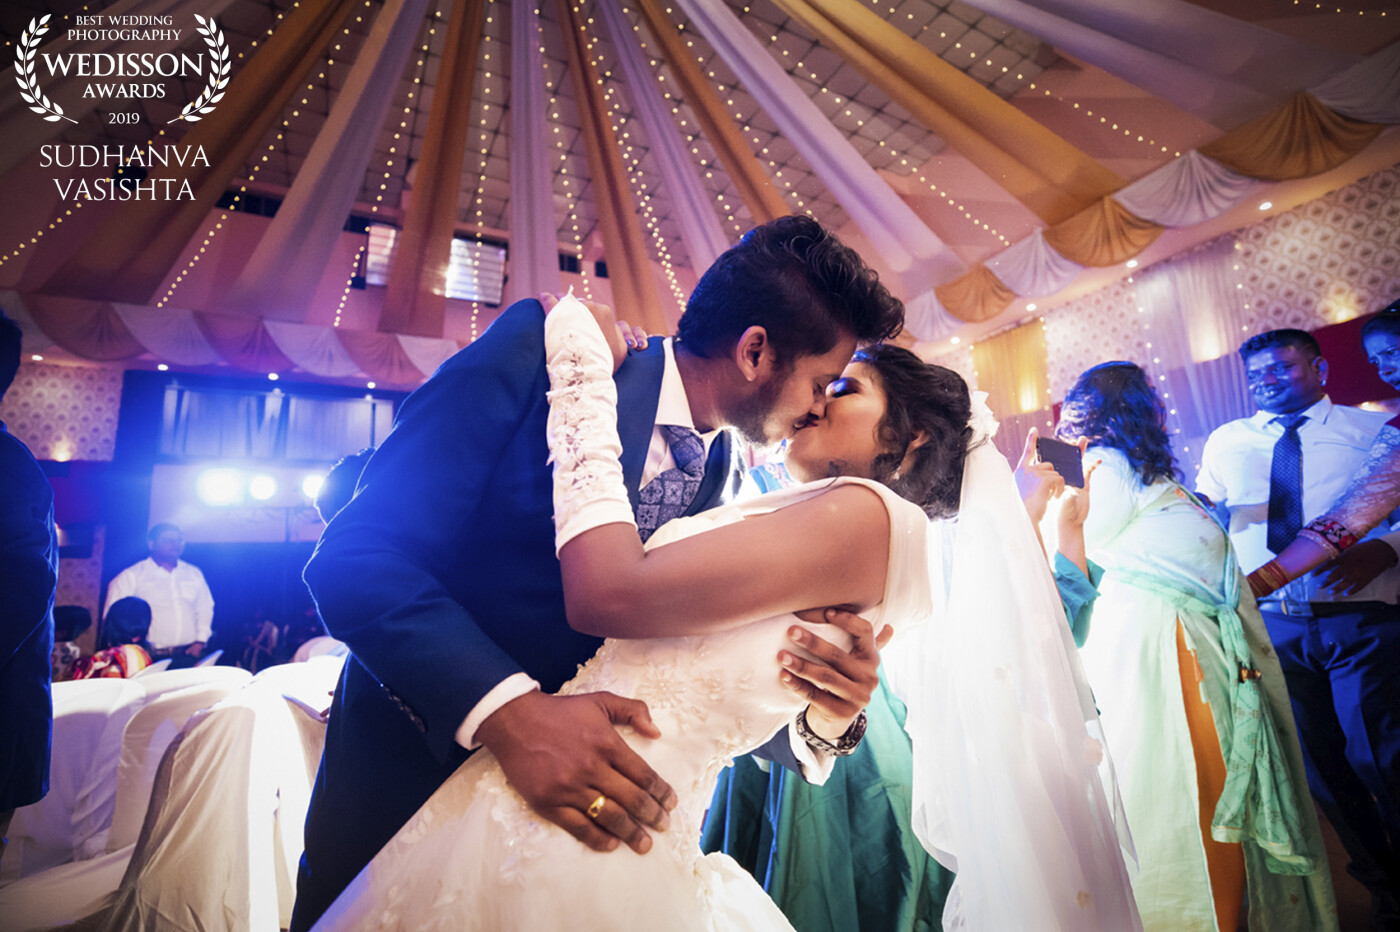 Make way for the Bride and Groom from Kolkata, India. <br />
This priceless moment was during their first dance as a married couple. <br />
As the couple shared this intimate moment, we captured it in a second's time for them to cherish it for a lifetime!